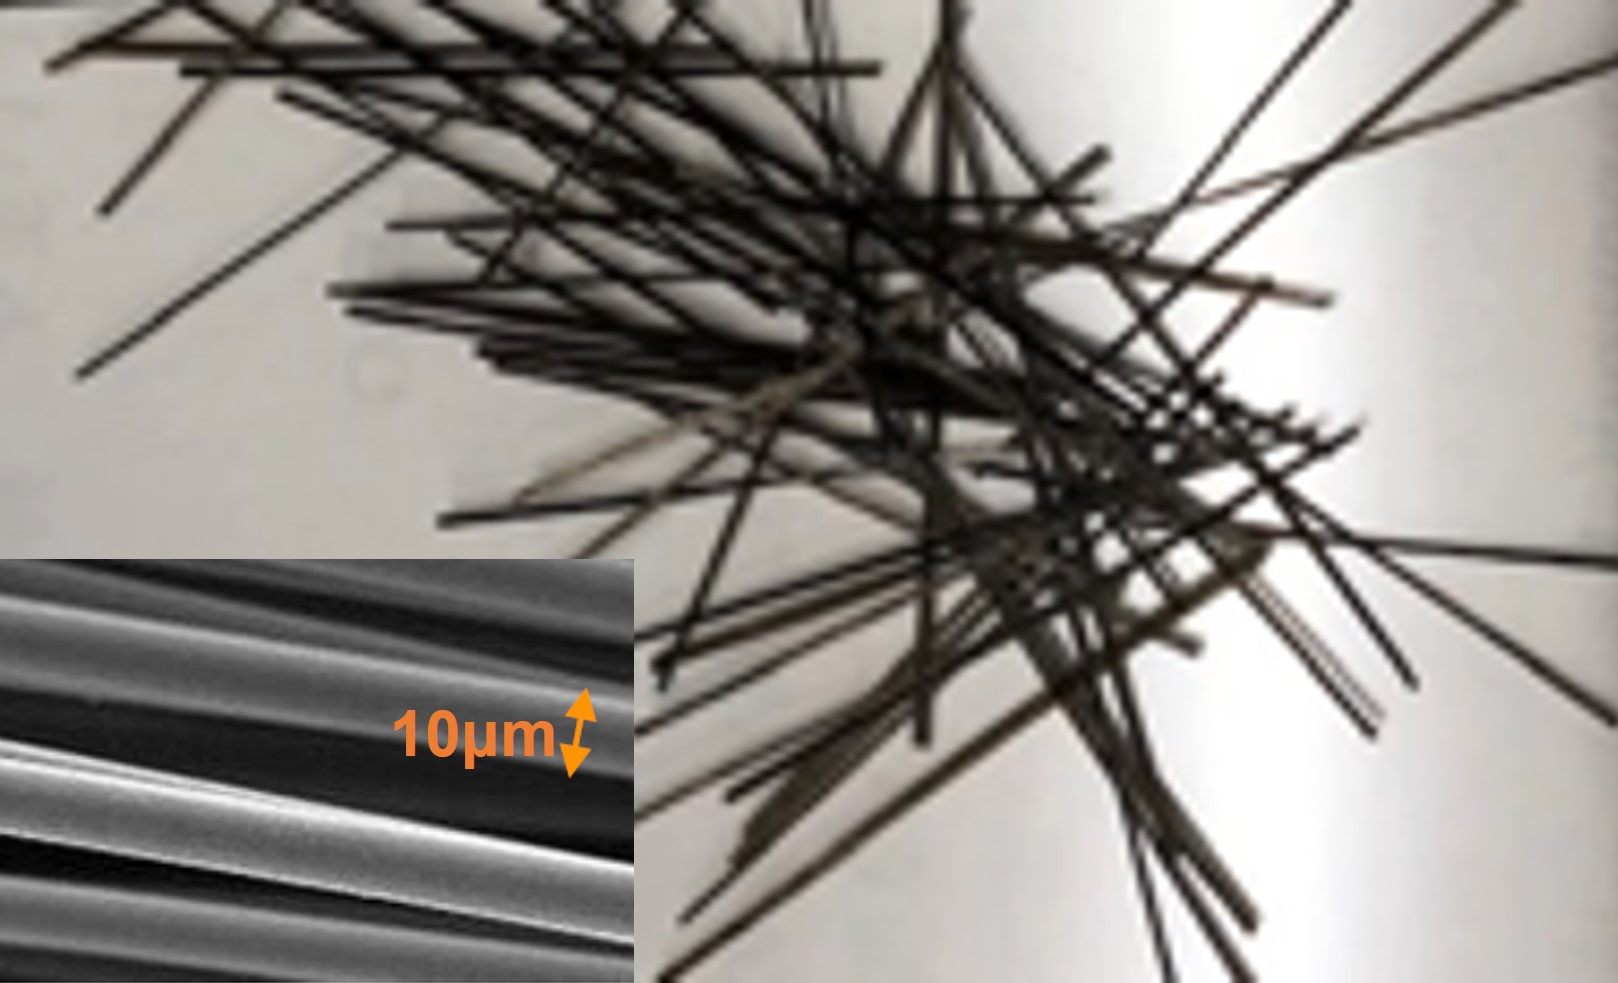 Short fibers for reinforcing concrete made from coal ash and magnified image of its long fibers